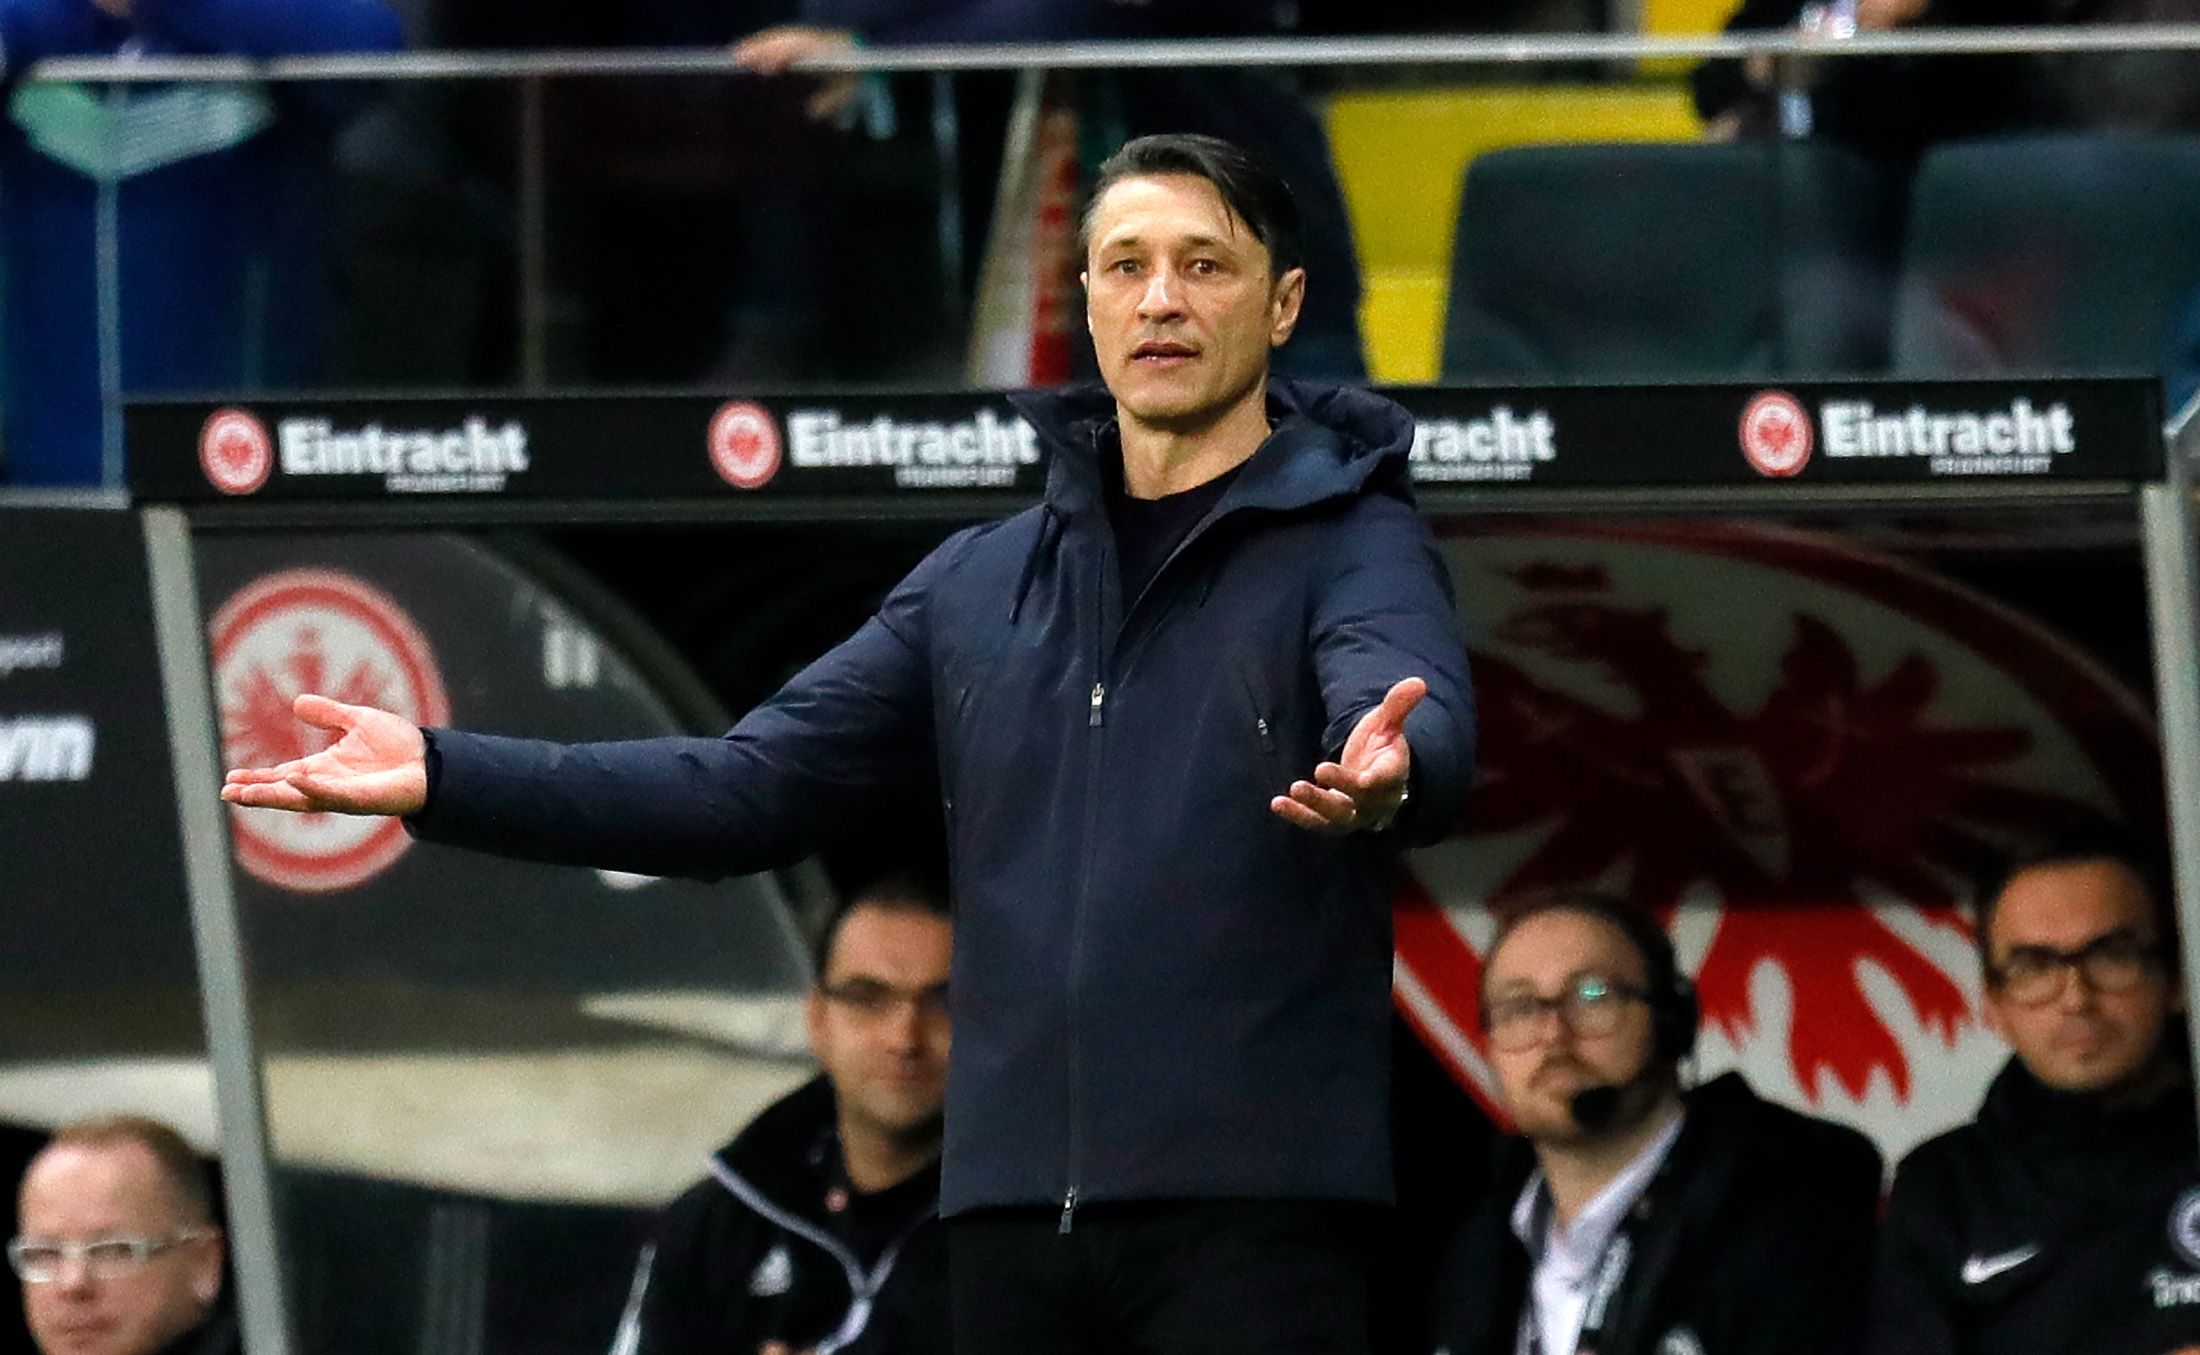 epa07967210 Bayern's head coach Niko Kovac reacts during the German Bundesliga soccer match between Eintracht Frankfurt and FC Bayern Munich in Frankfurt, Germany, 02 November 2019.  EPA/RONALD WITTEK CONDITIONS - ATTENTION: The DFL regulations prohibit any use of photographs as image sequences and/or quasi-video.